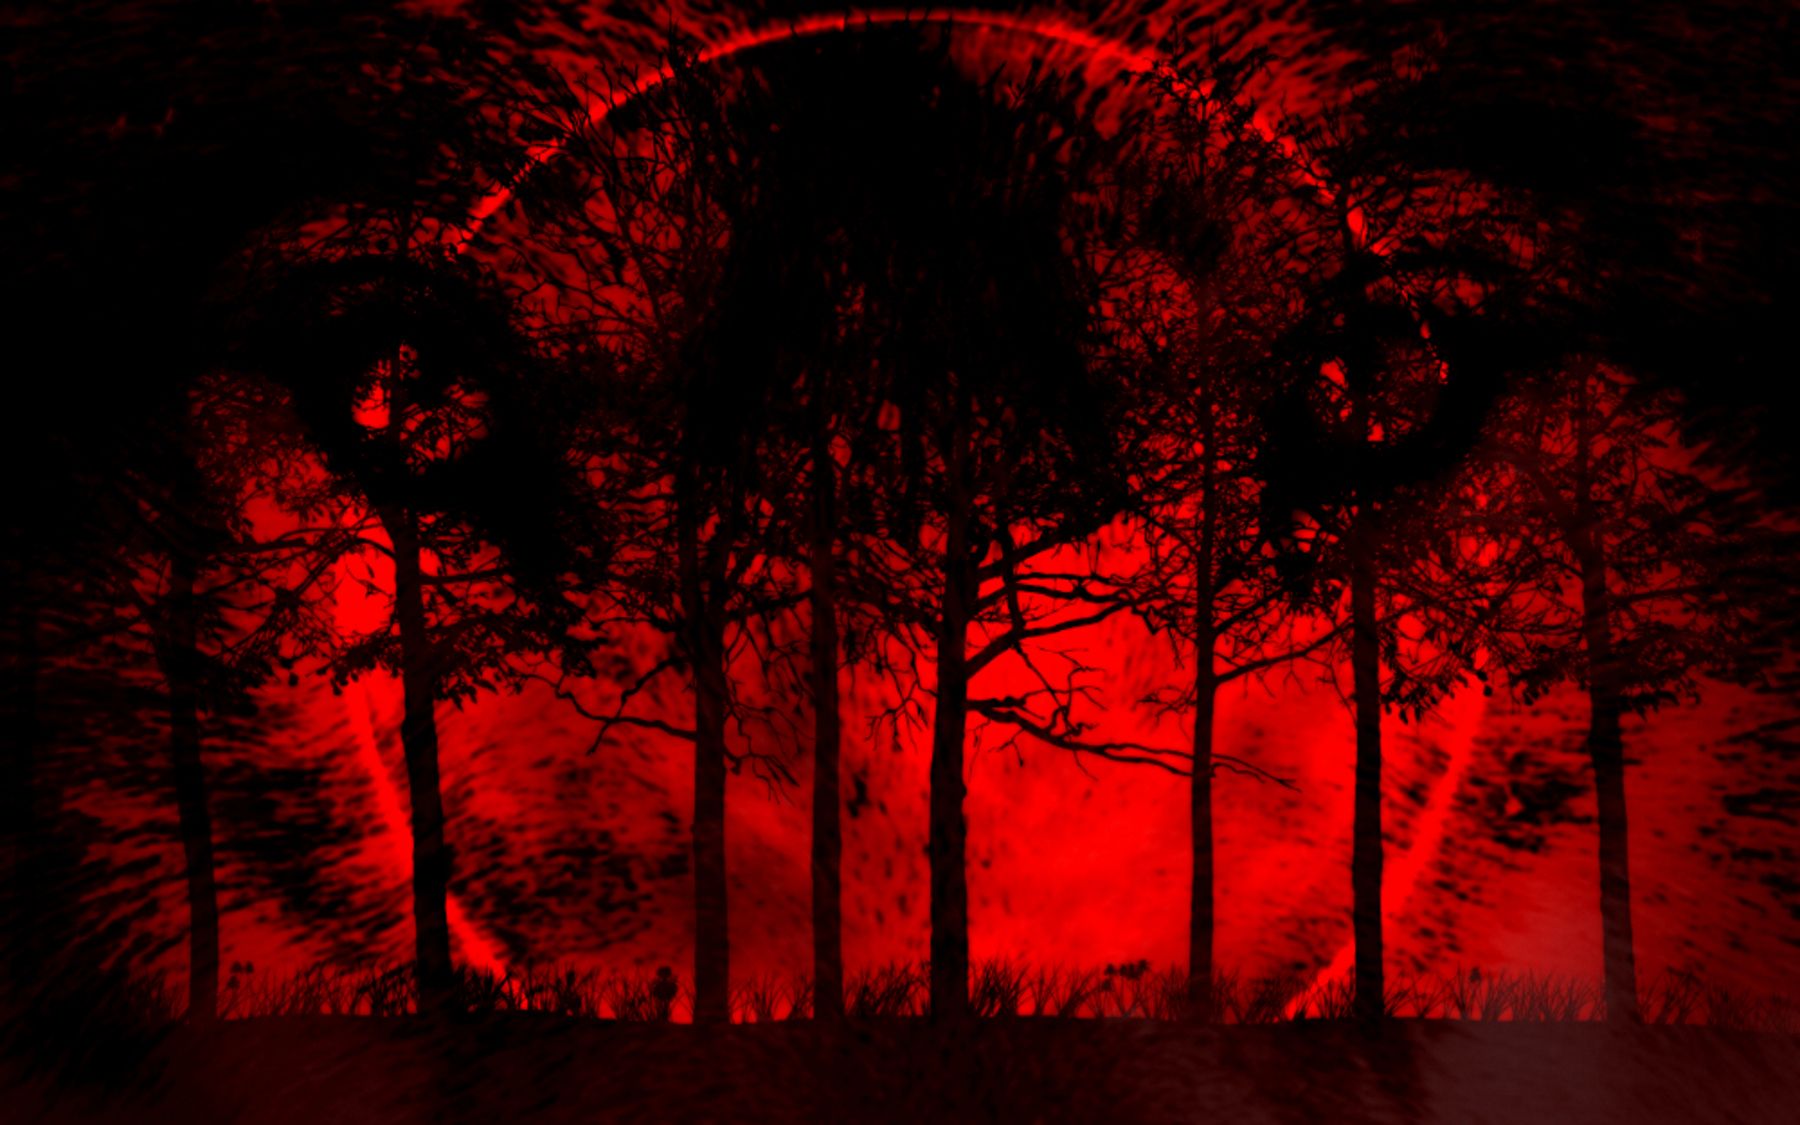 Red Moon Wolf Wallpapers